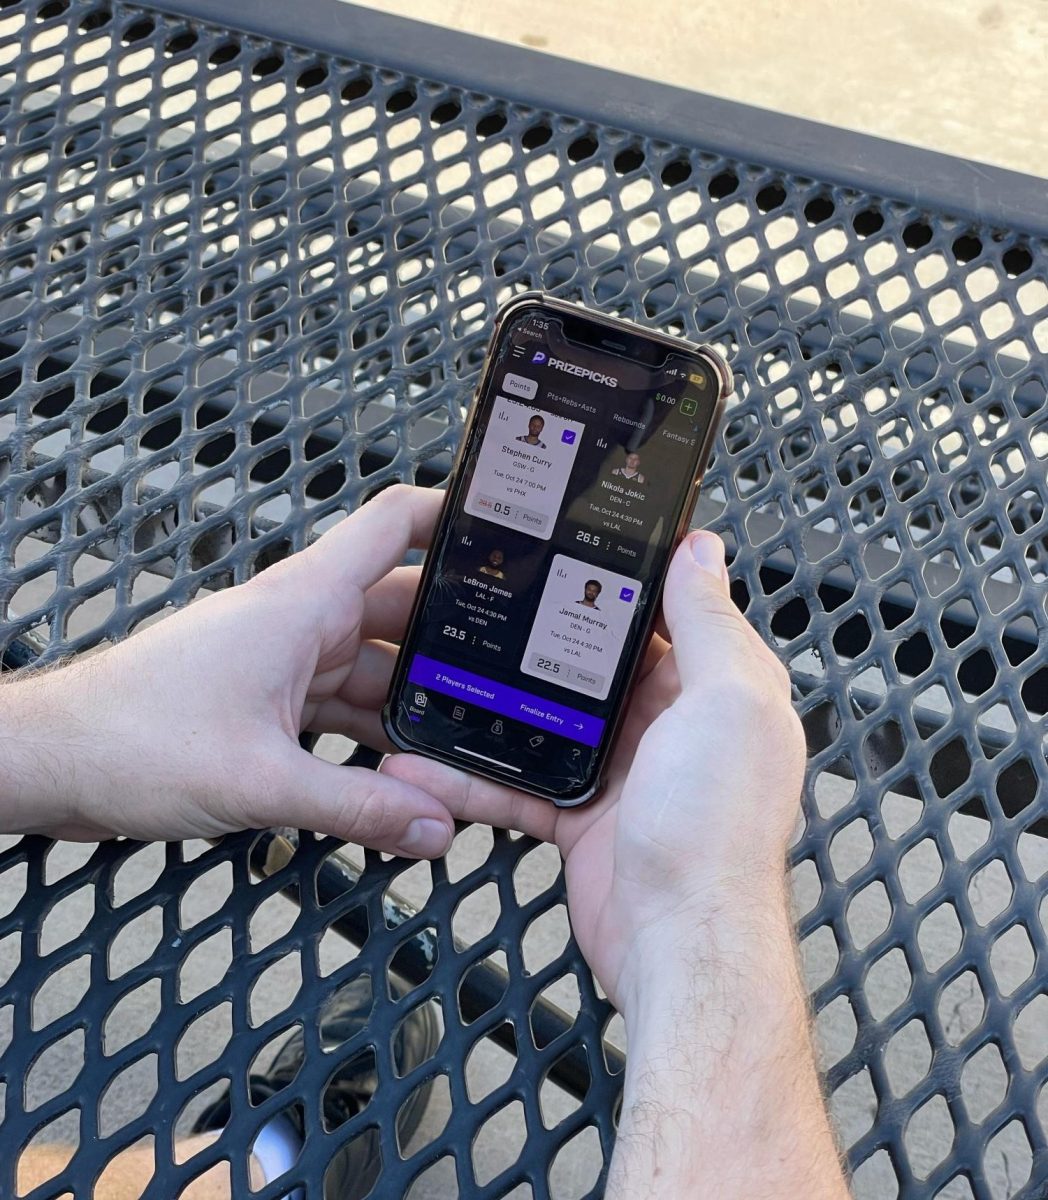 A student on their phone using the app PrizePicks, an app that is used to place sports bets.